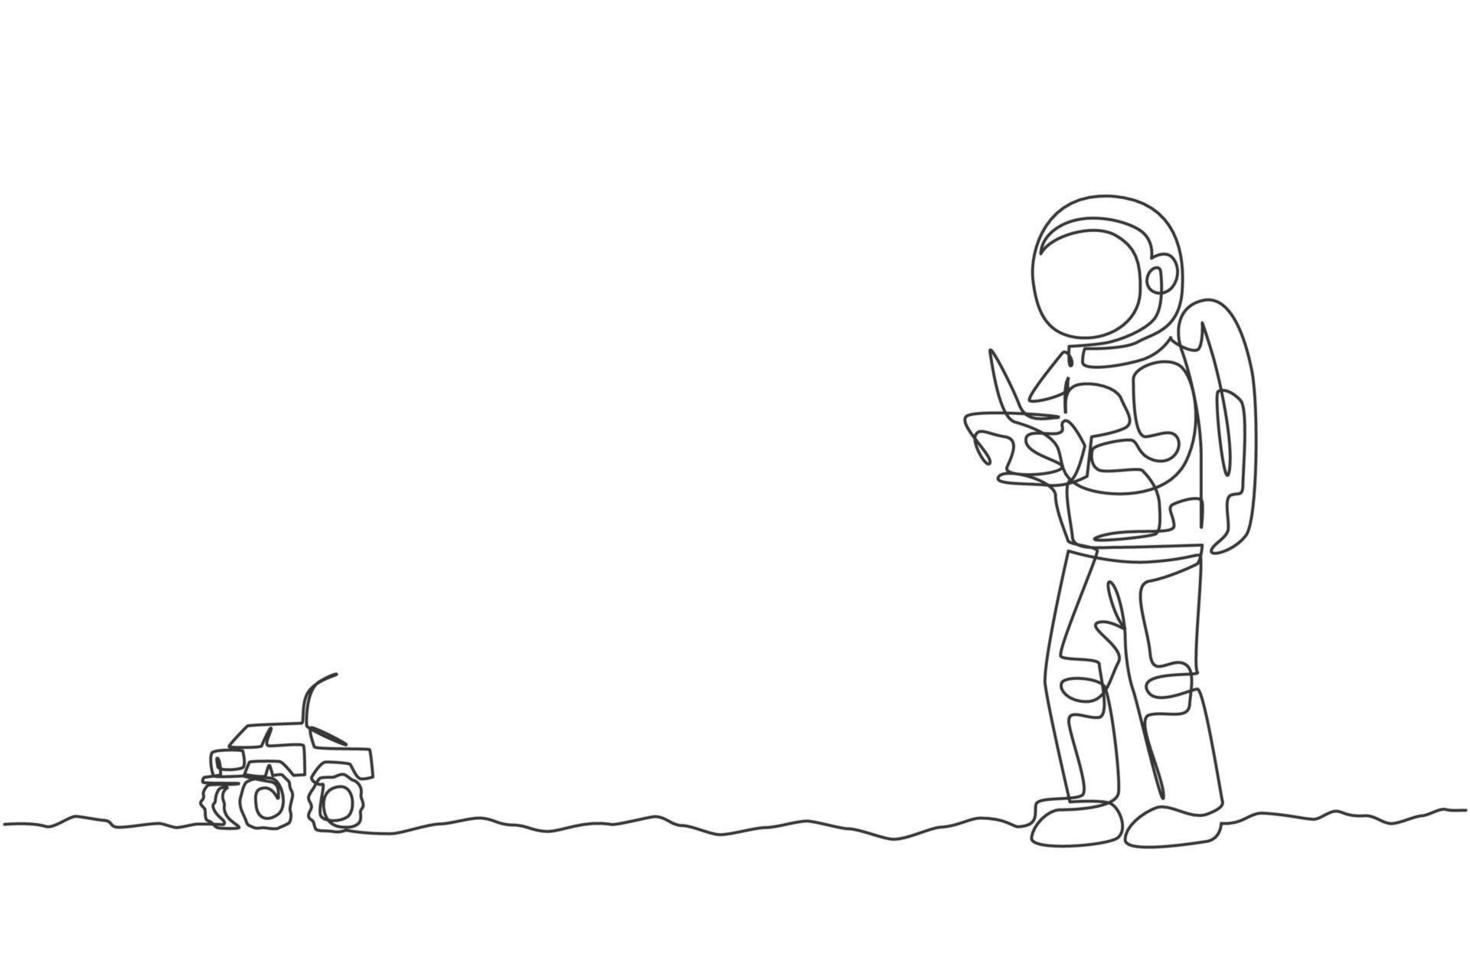 Single continuous line drawing astronaut playing monster truck radio control in moon surface. Having fun in leisure time on outer space concept. Trendy one line draw graphic design vector illustration